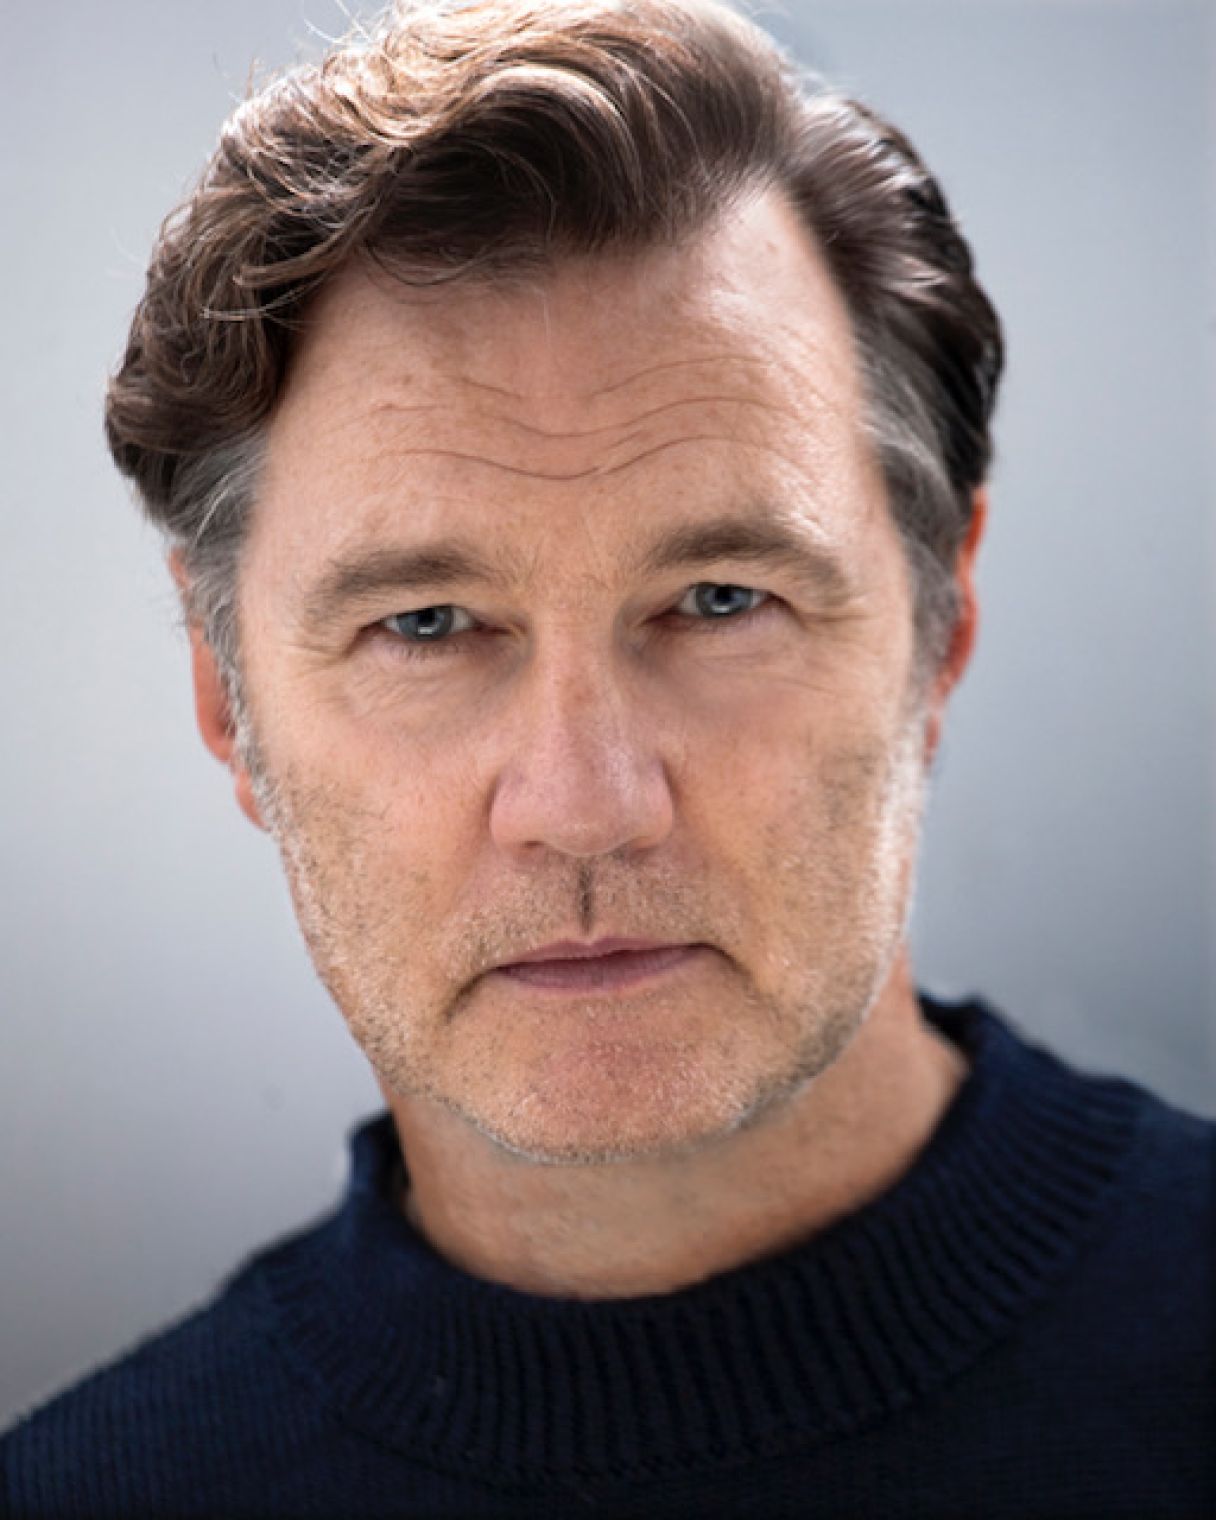 David Morrissey is to star in brand new BBC Three comedy drama 'Daddy Issues'